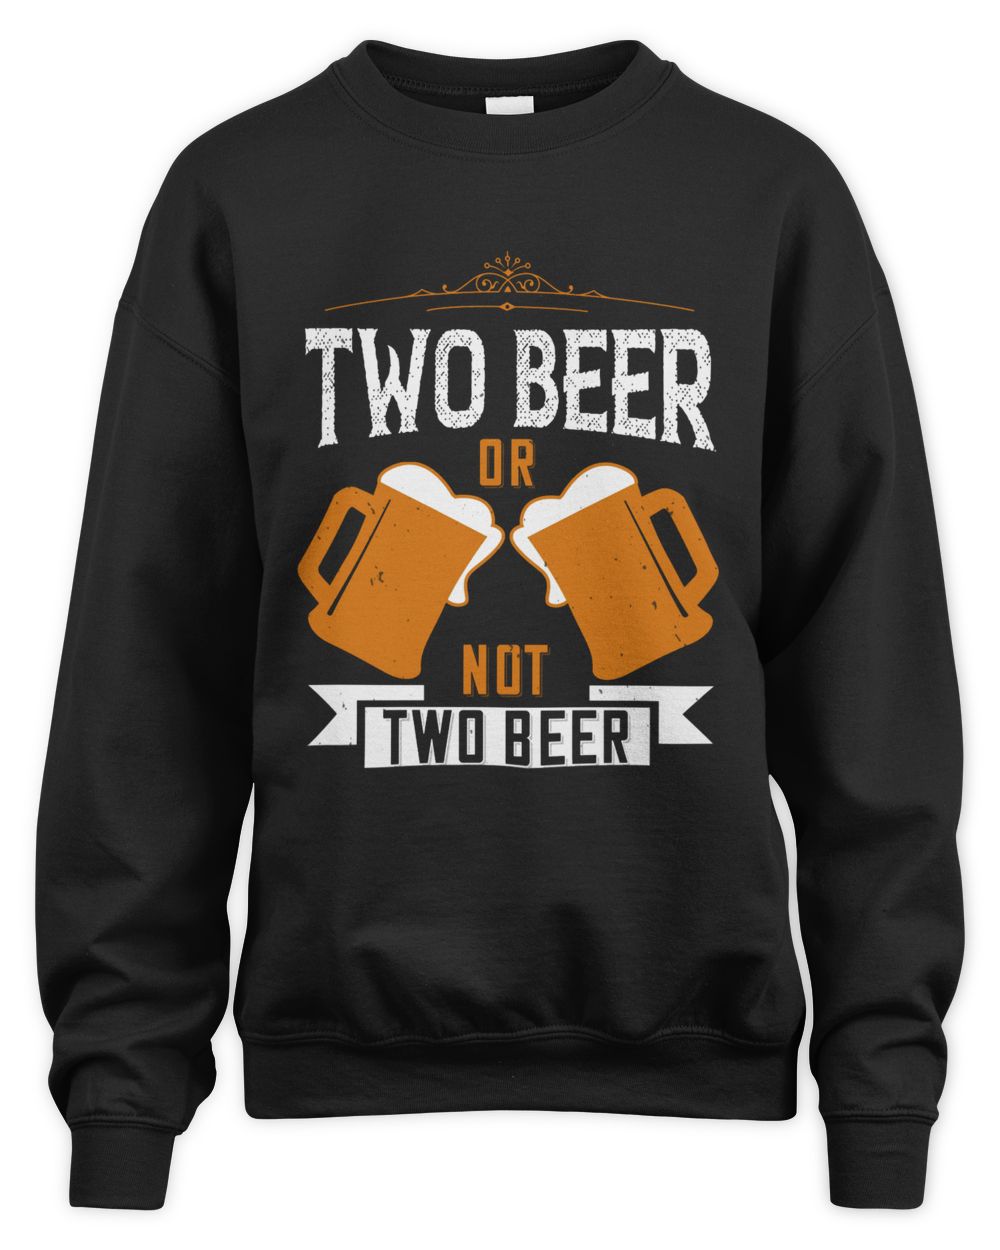 Two Beer Or Not Two Beer Beer Shirt For Beer Lover With Free Shipping, Great Gift For Fathers Day Unisex Sweatshirt black 